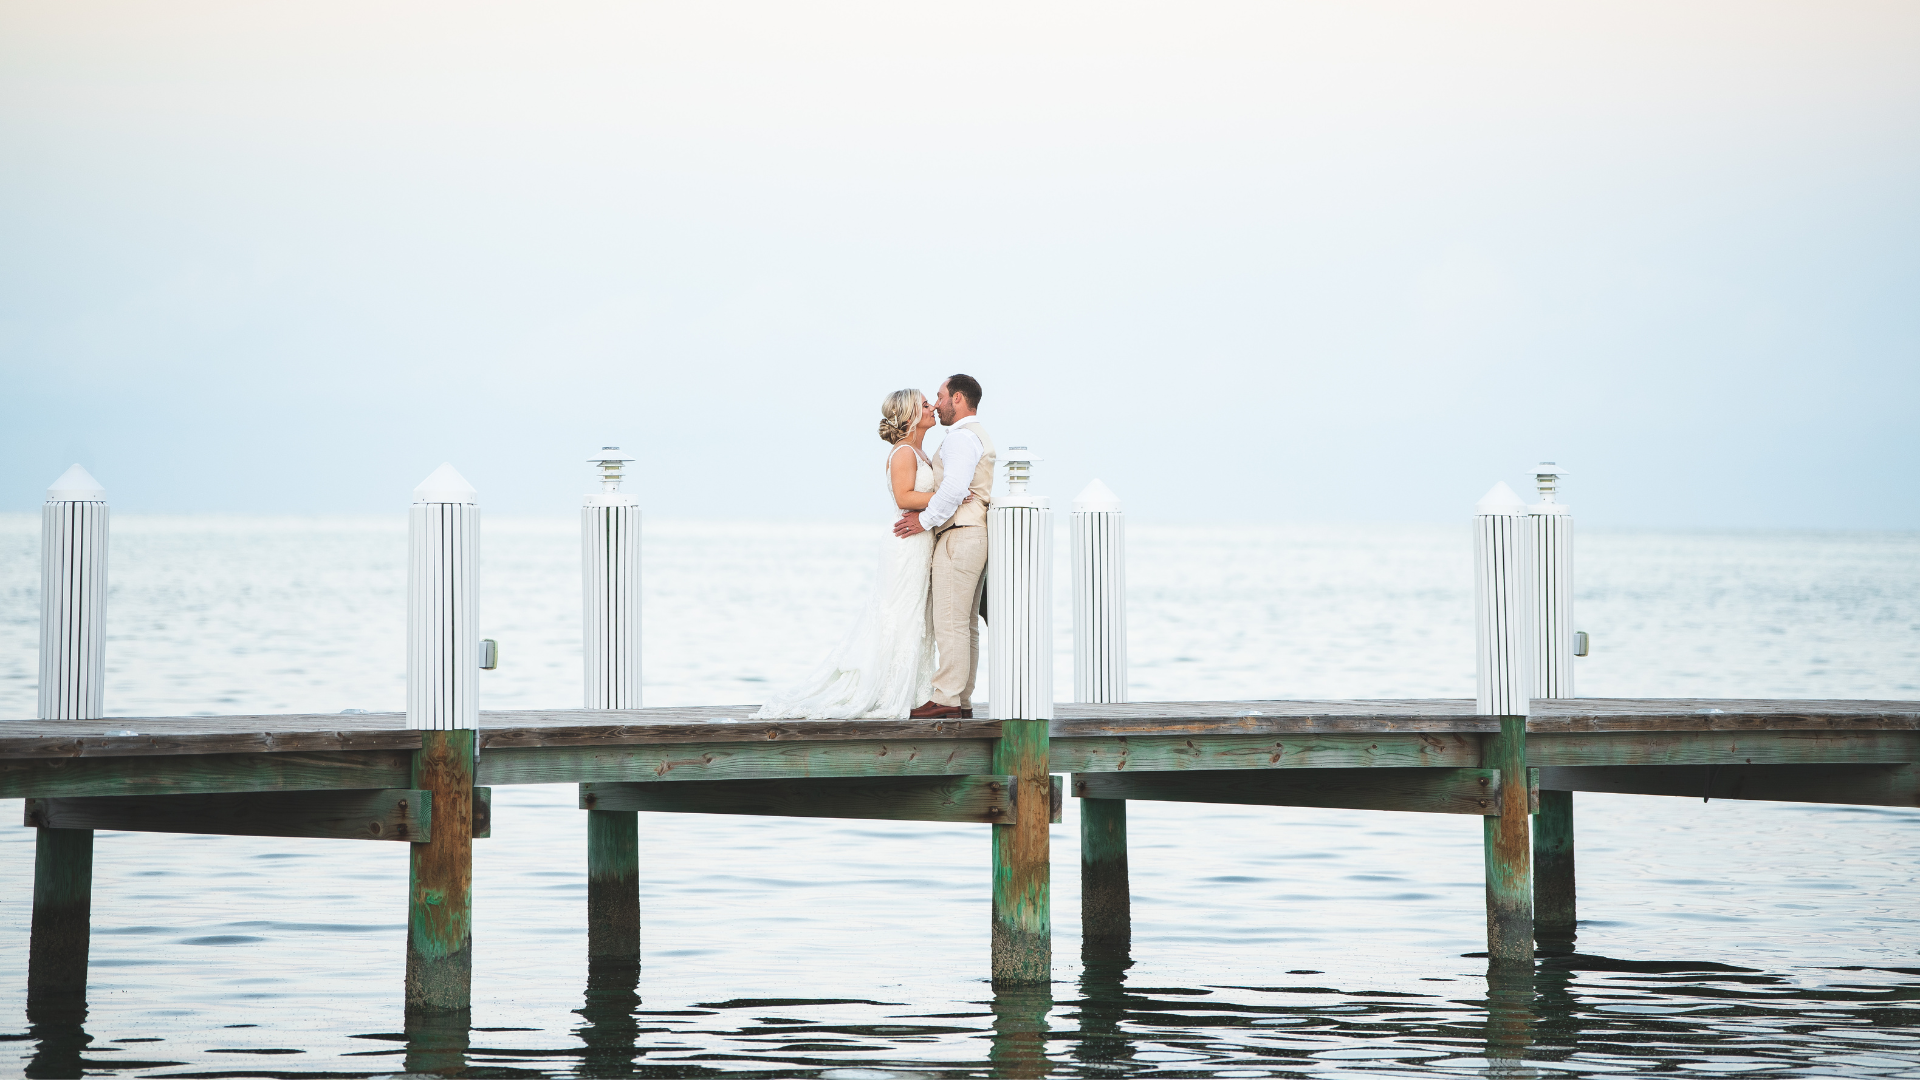 A Man And Woman Kissing On A Pier